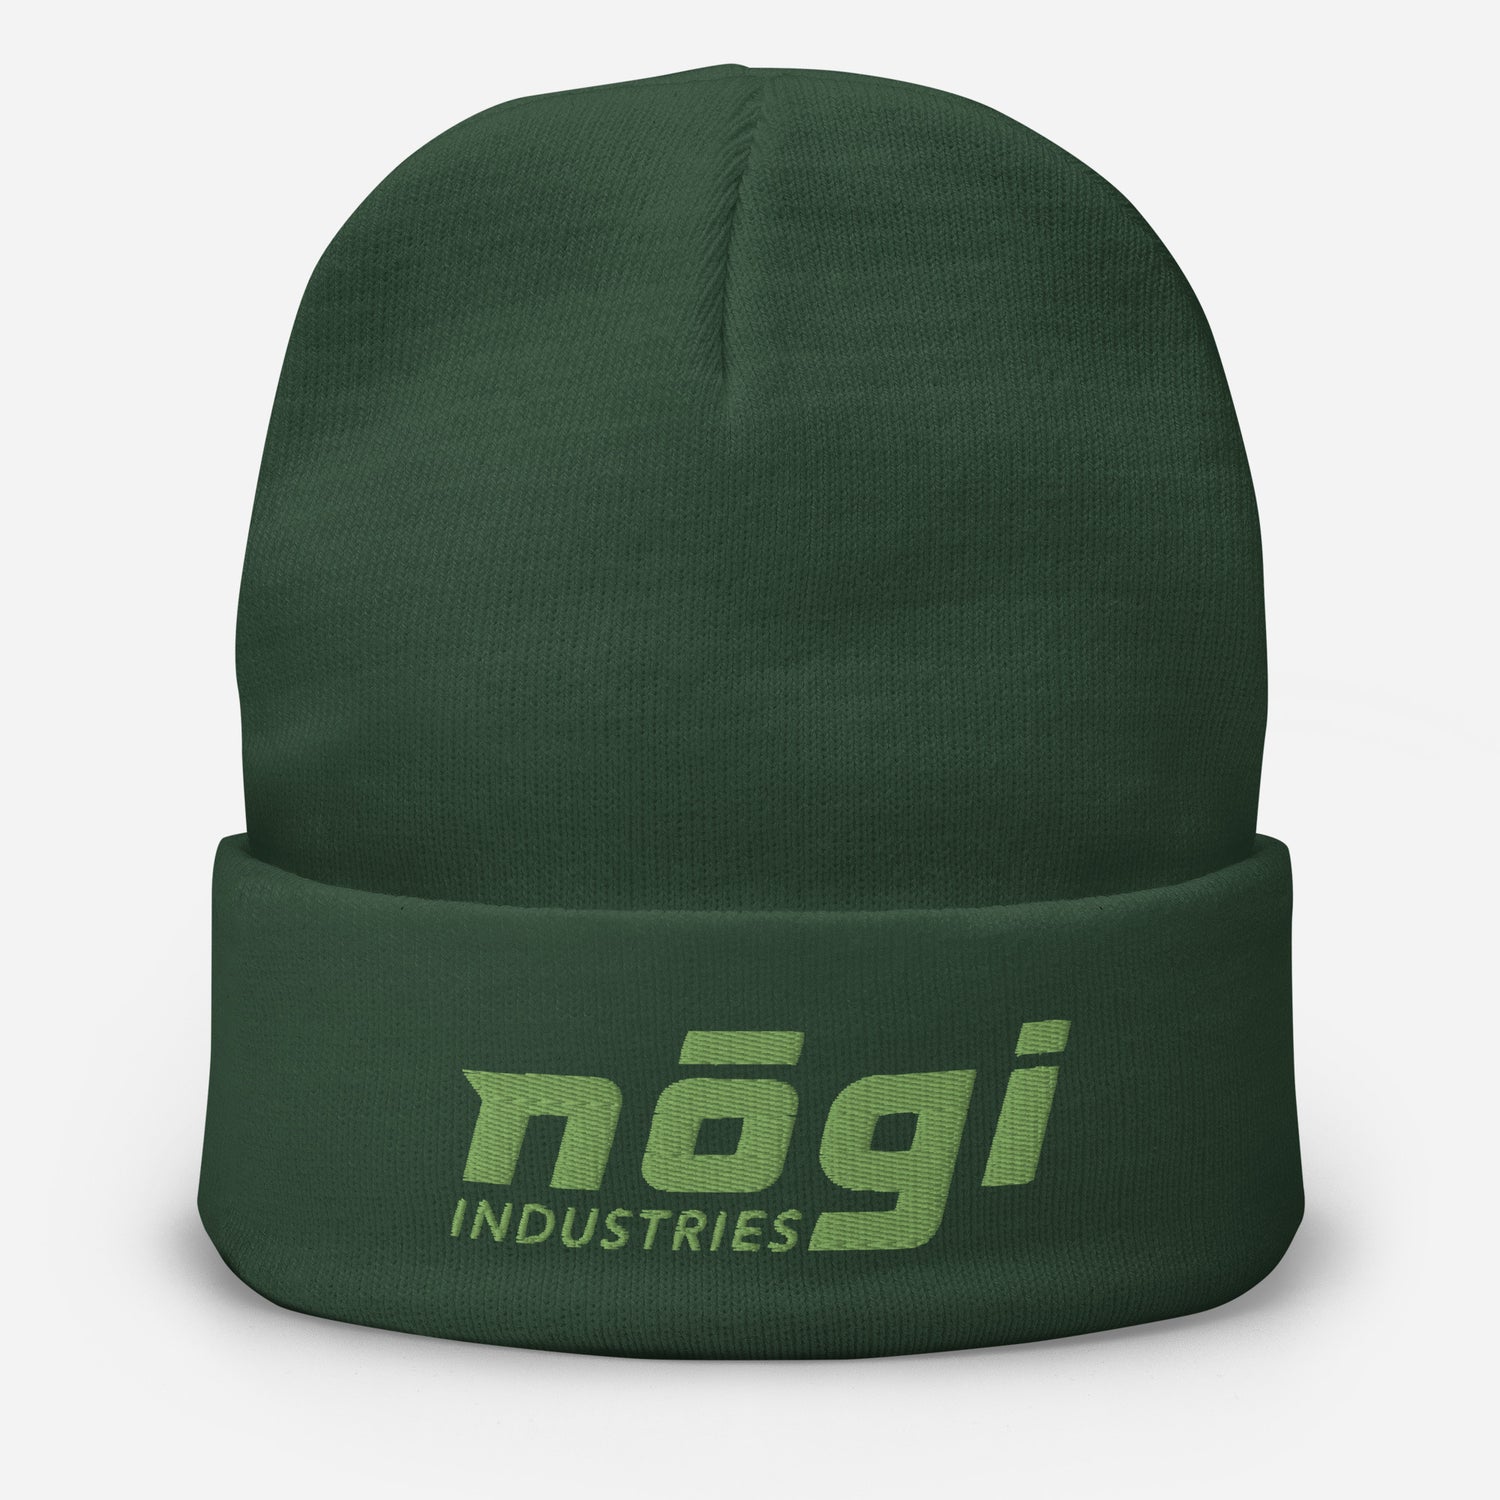 Embroidered Beanie w Puff logo (Green & Green) by Nogi Industries